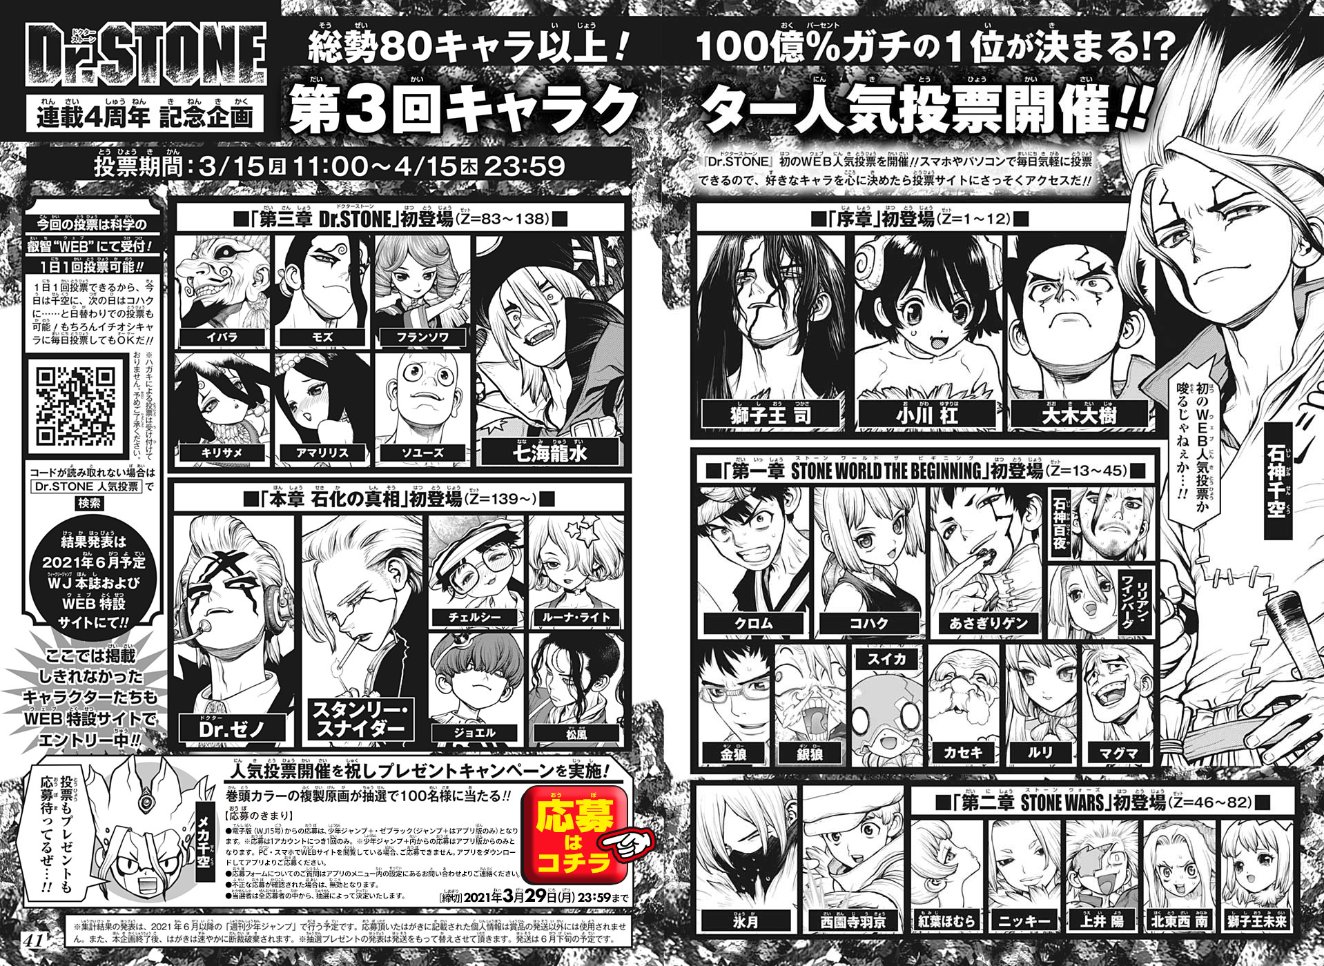 Shonen Jump News Unofficial Dr Stone S 4th Anniversary Character Popularity Poll Promotional Page T Co Ksjoawsnl5 Twitter